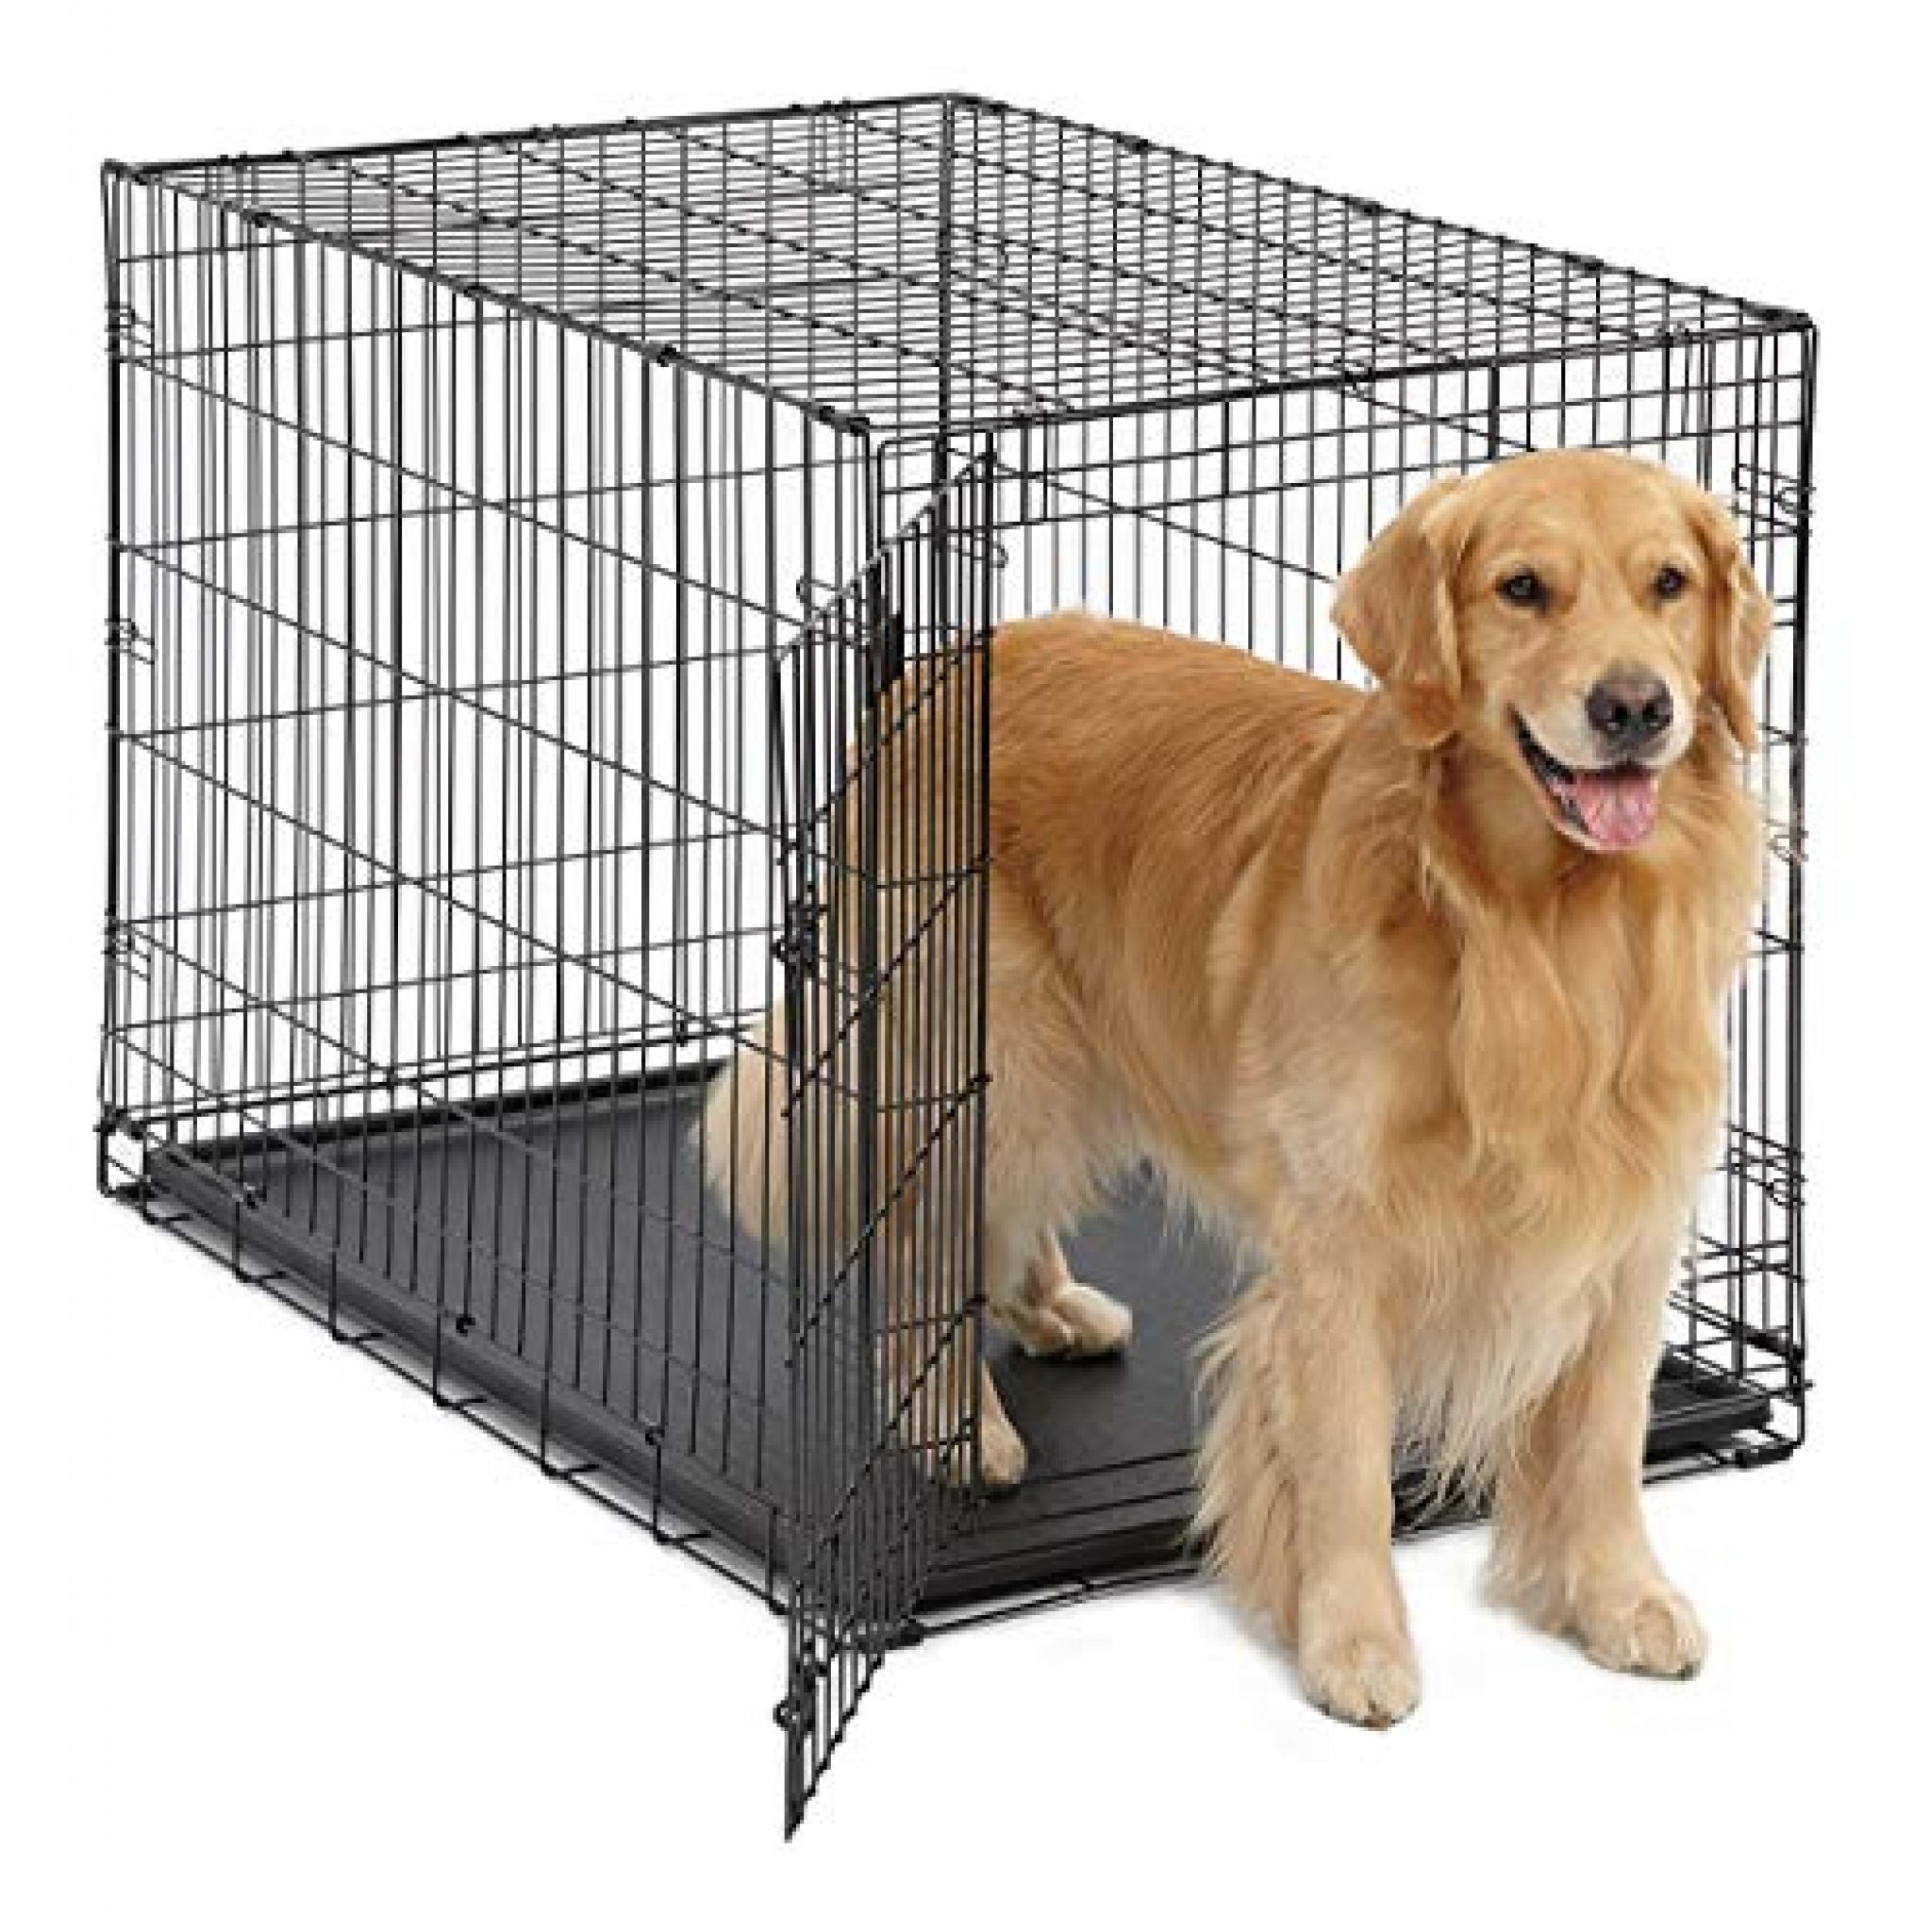 Large Dog Crate Midwest Icrate Folding Metal Dog Crate Divider Panel 2028x2048 